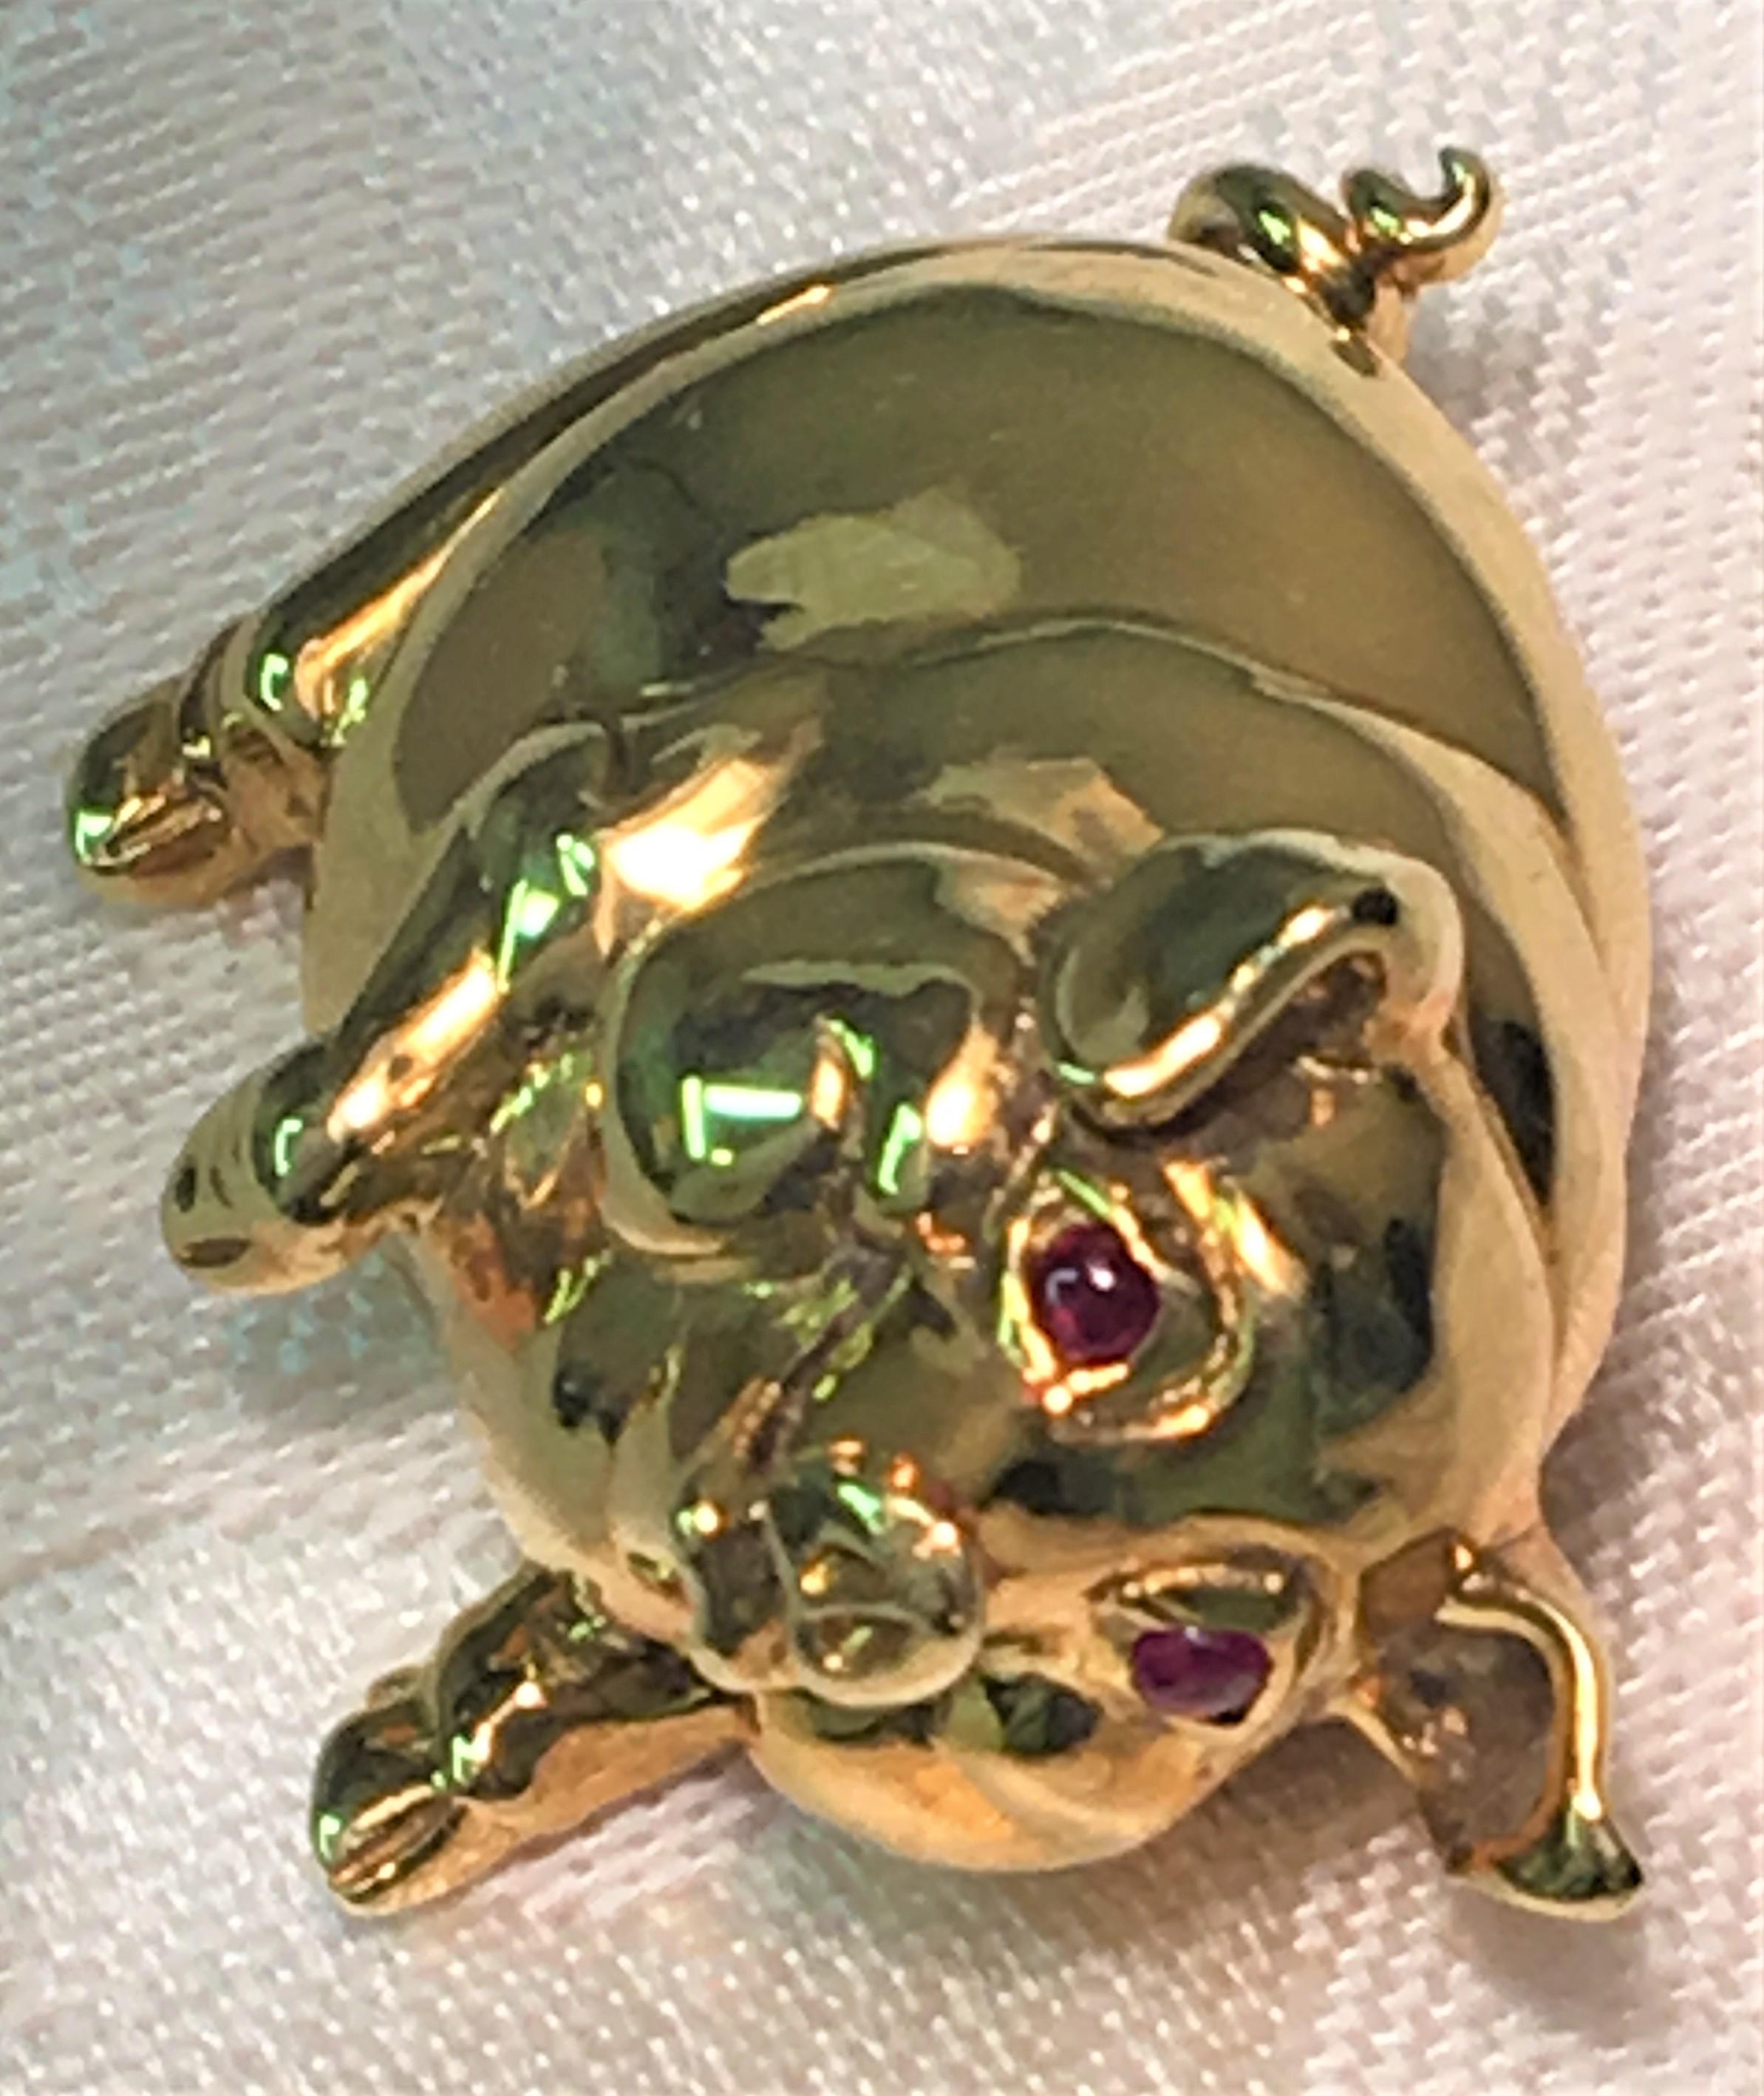 This happy dancing pig will make everyone smile! 
18 karat yellow gold pig
Two cabochon ruby eyes
Hinged pin with safety
Stamped 